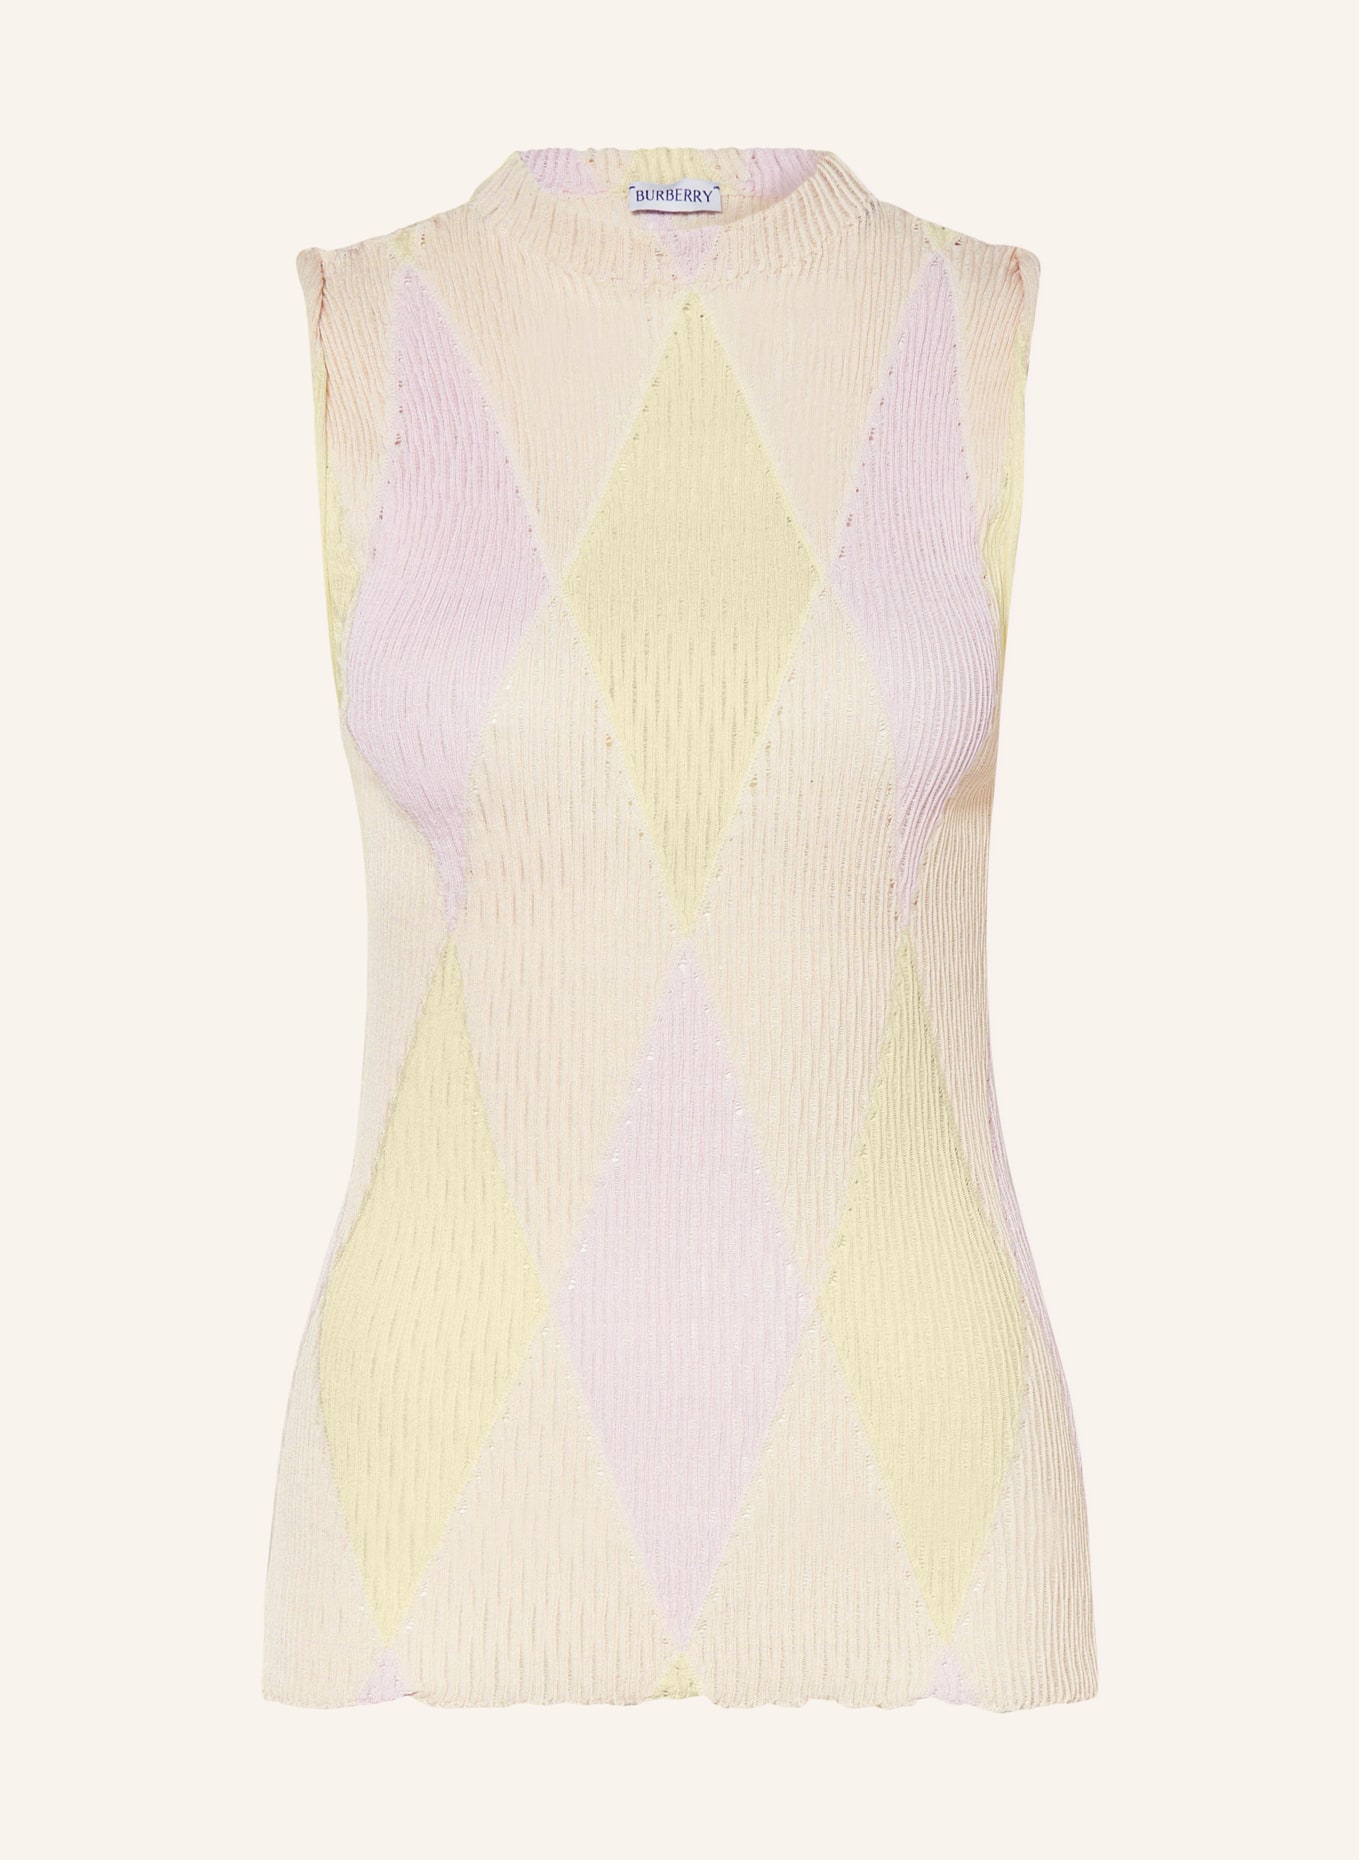 BURBERRY Top with silk, Color: LIGHT YELLOW/ PINK (Image 1)